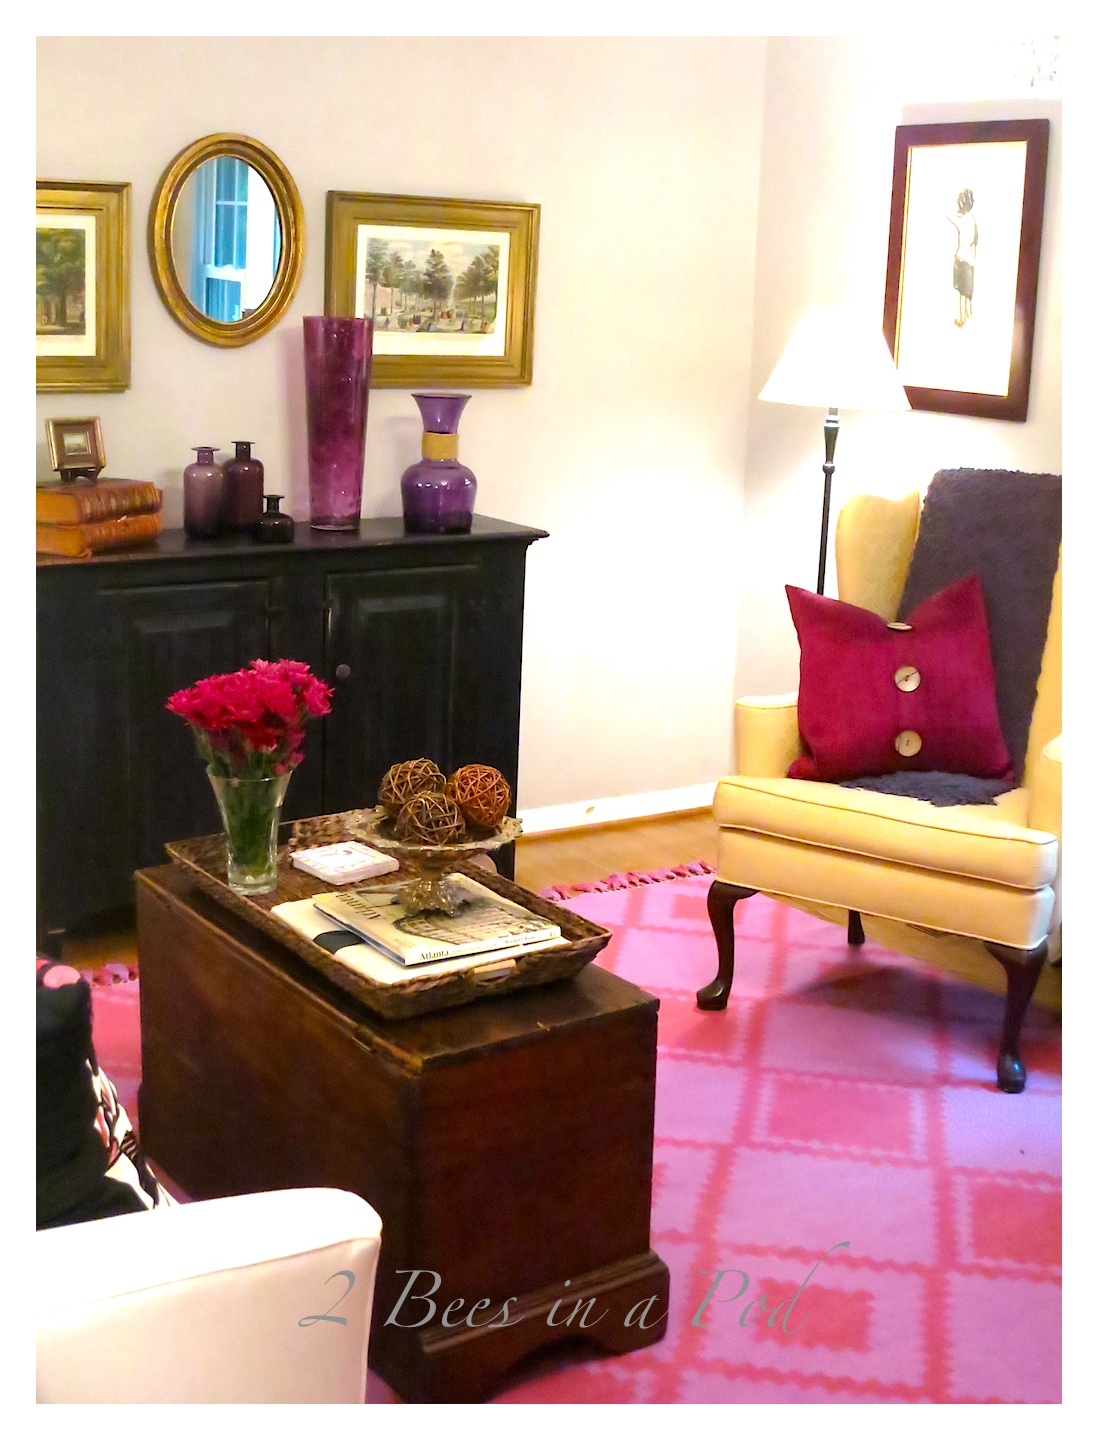 We did a living room makeover for a client that was so much fun! She already had great taste, antiques and furnishings. We just came to pull it all together!